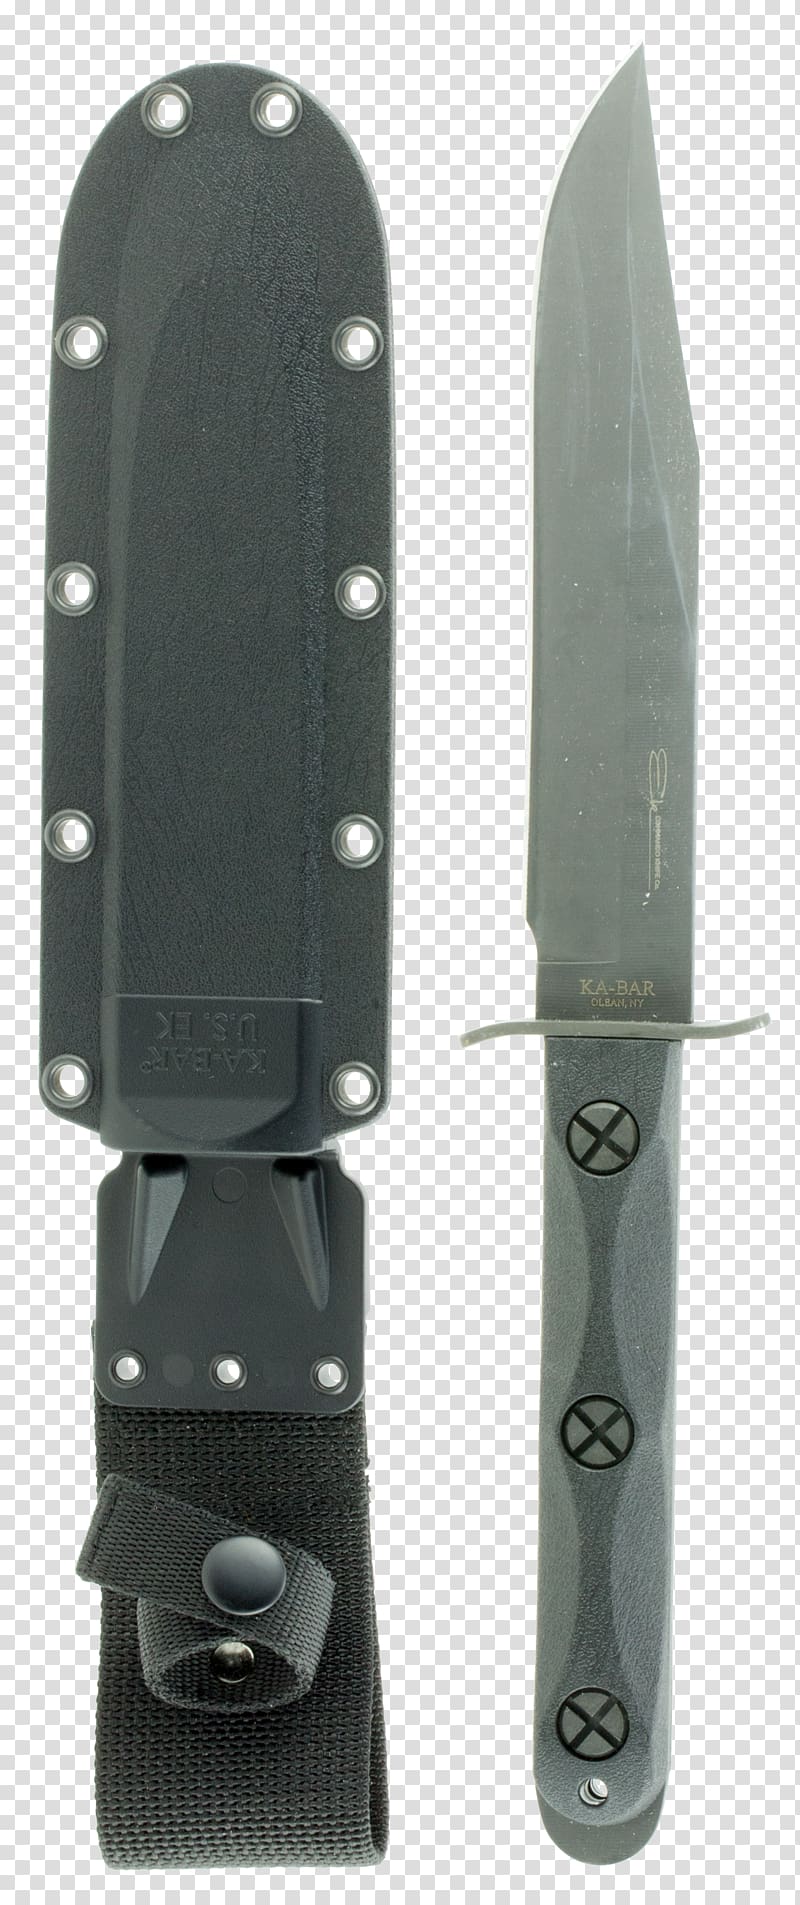 Throwing knife Utility Knives Glock Ges.m.b.H. Blade, knife transparent background PNG clipart